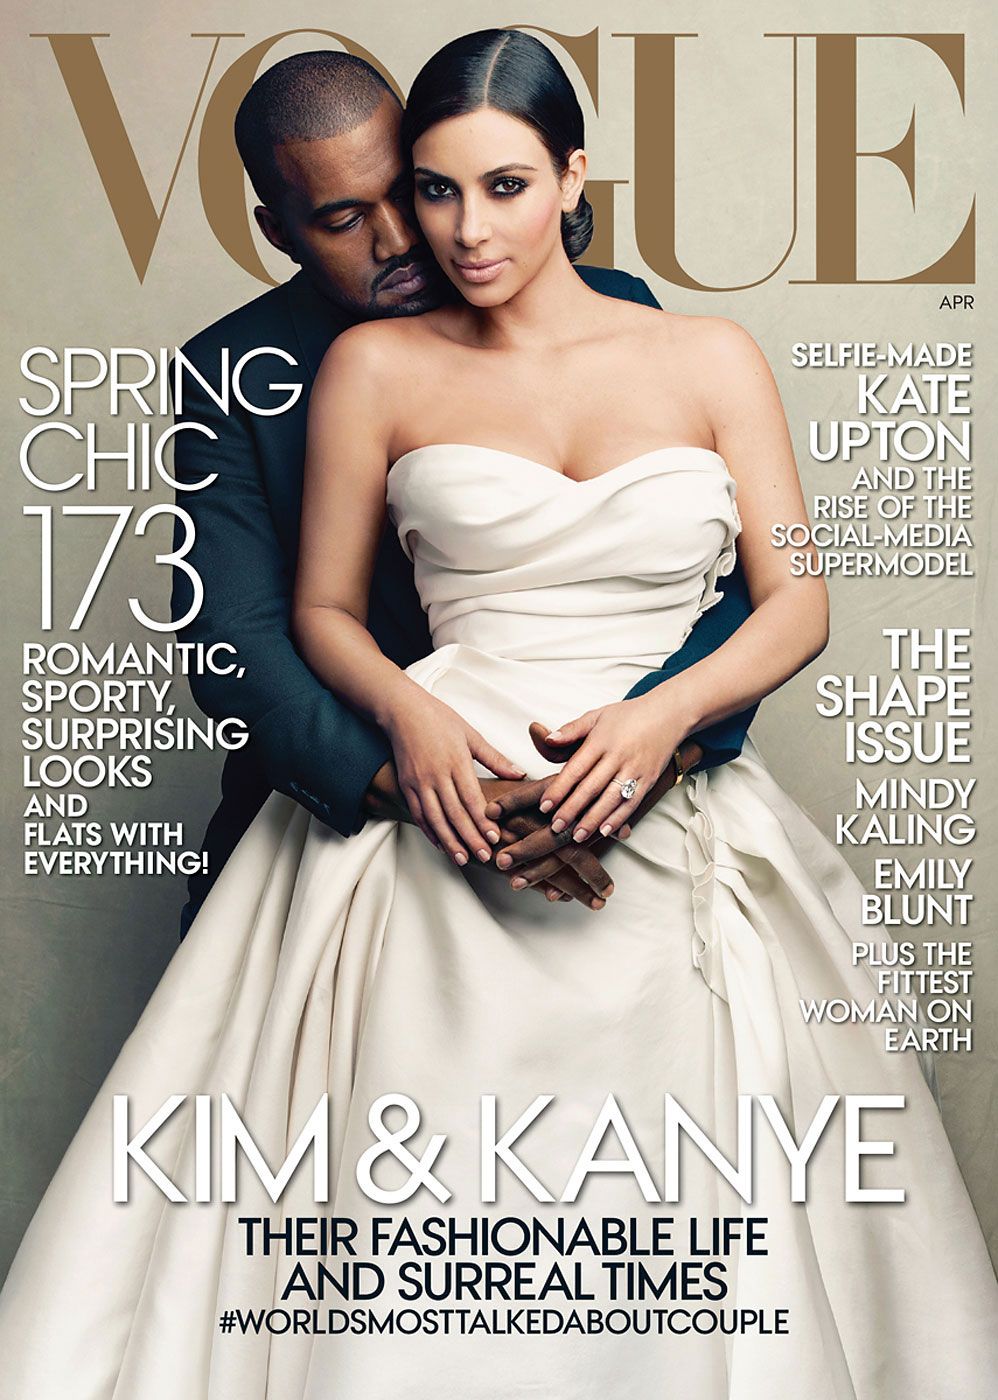 The End of Kim Kardashian and Kanye West's Wild Ride